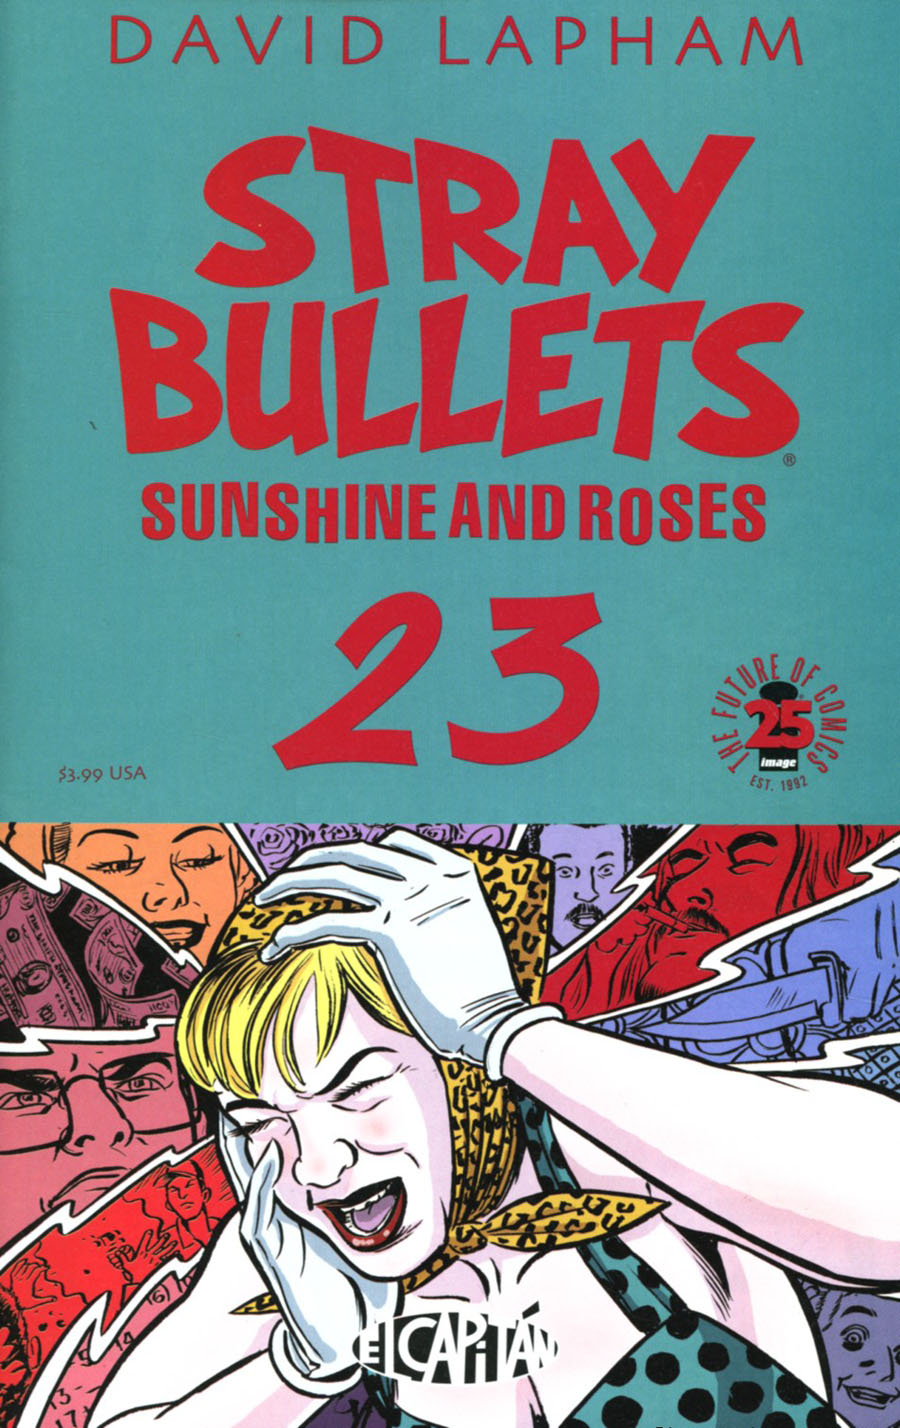 Stray Bullets Sunshine And Roses #23